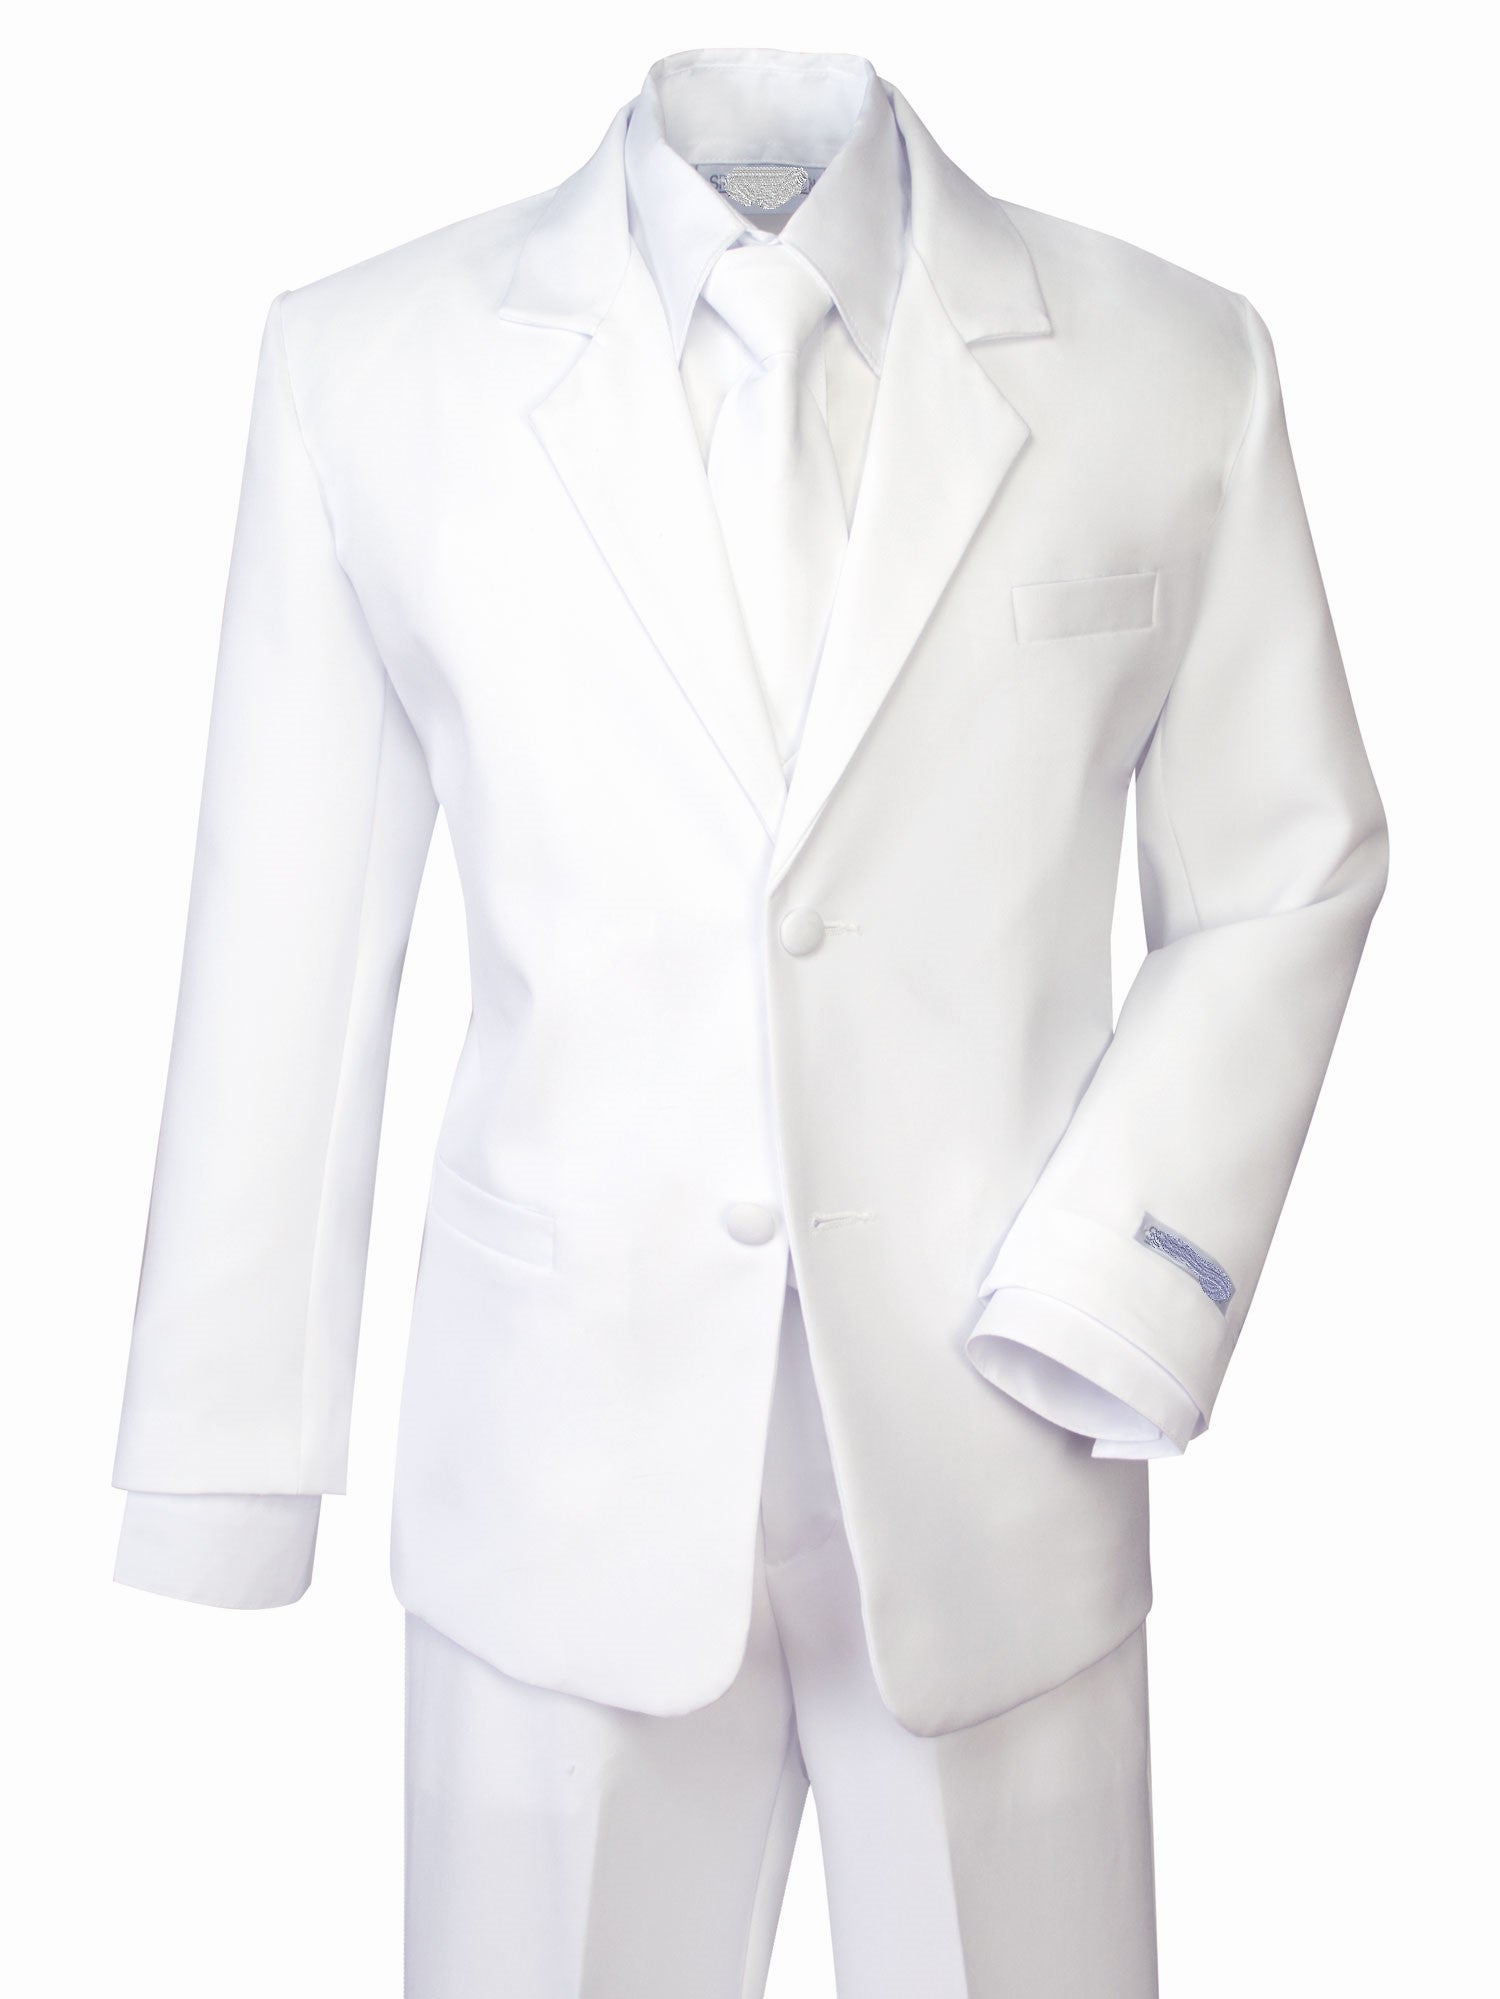 The Classic wedding suits, marking a stylish start for boys, kids, and toddlers.